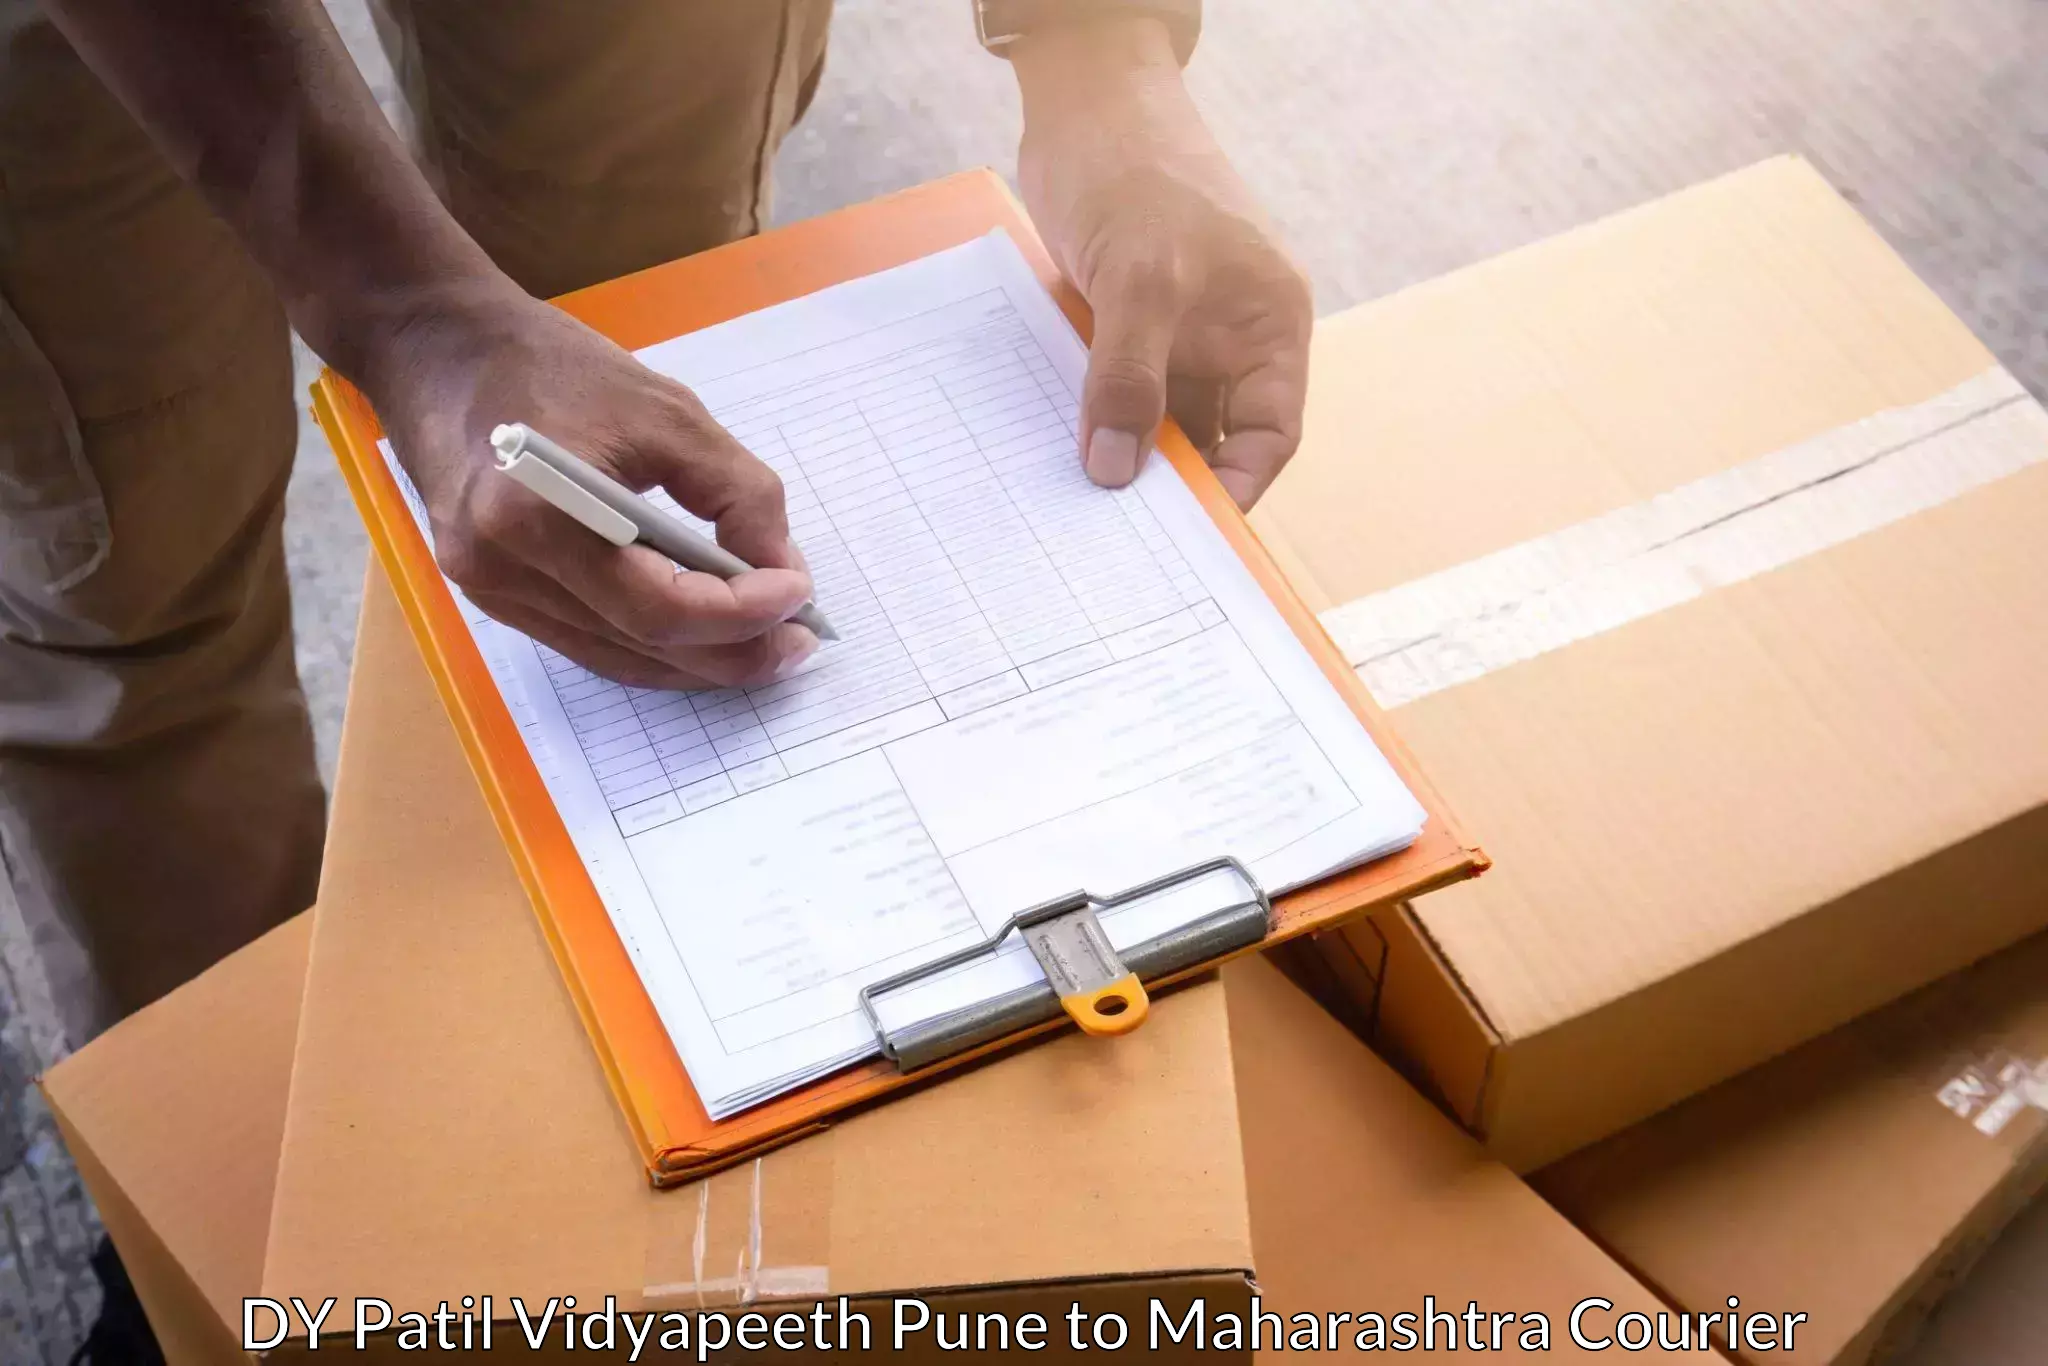 Business shipping needs DY Patil Vidyapeeth Pune to Raver